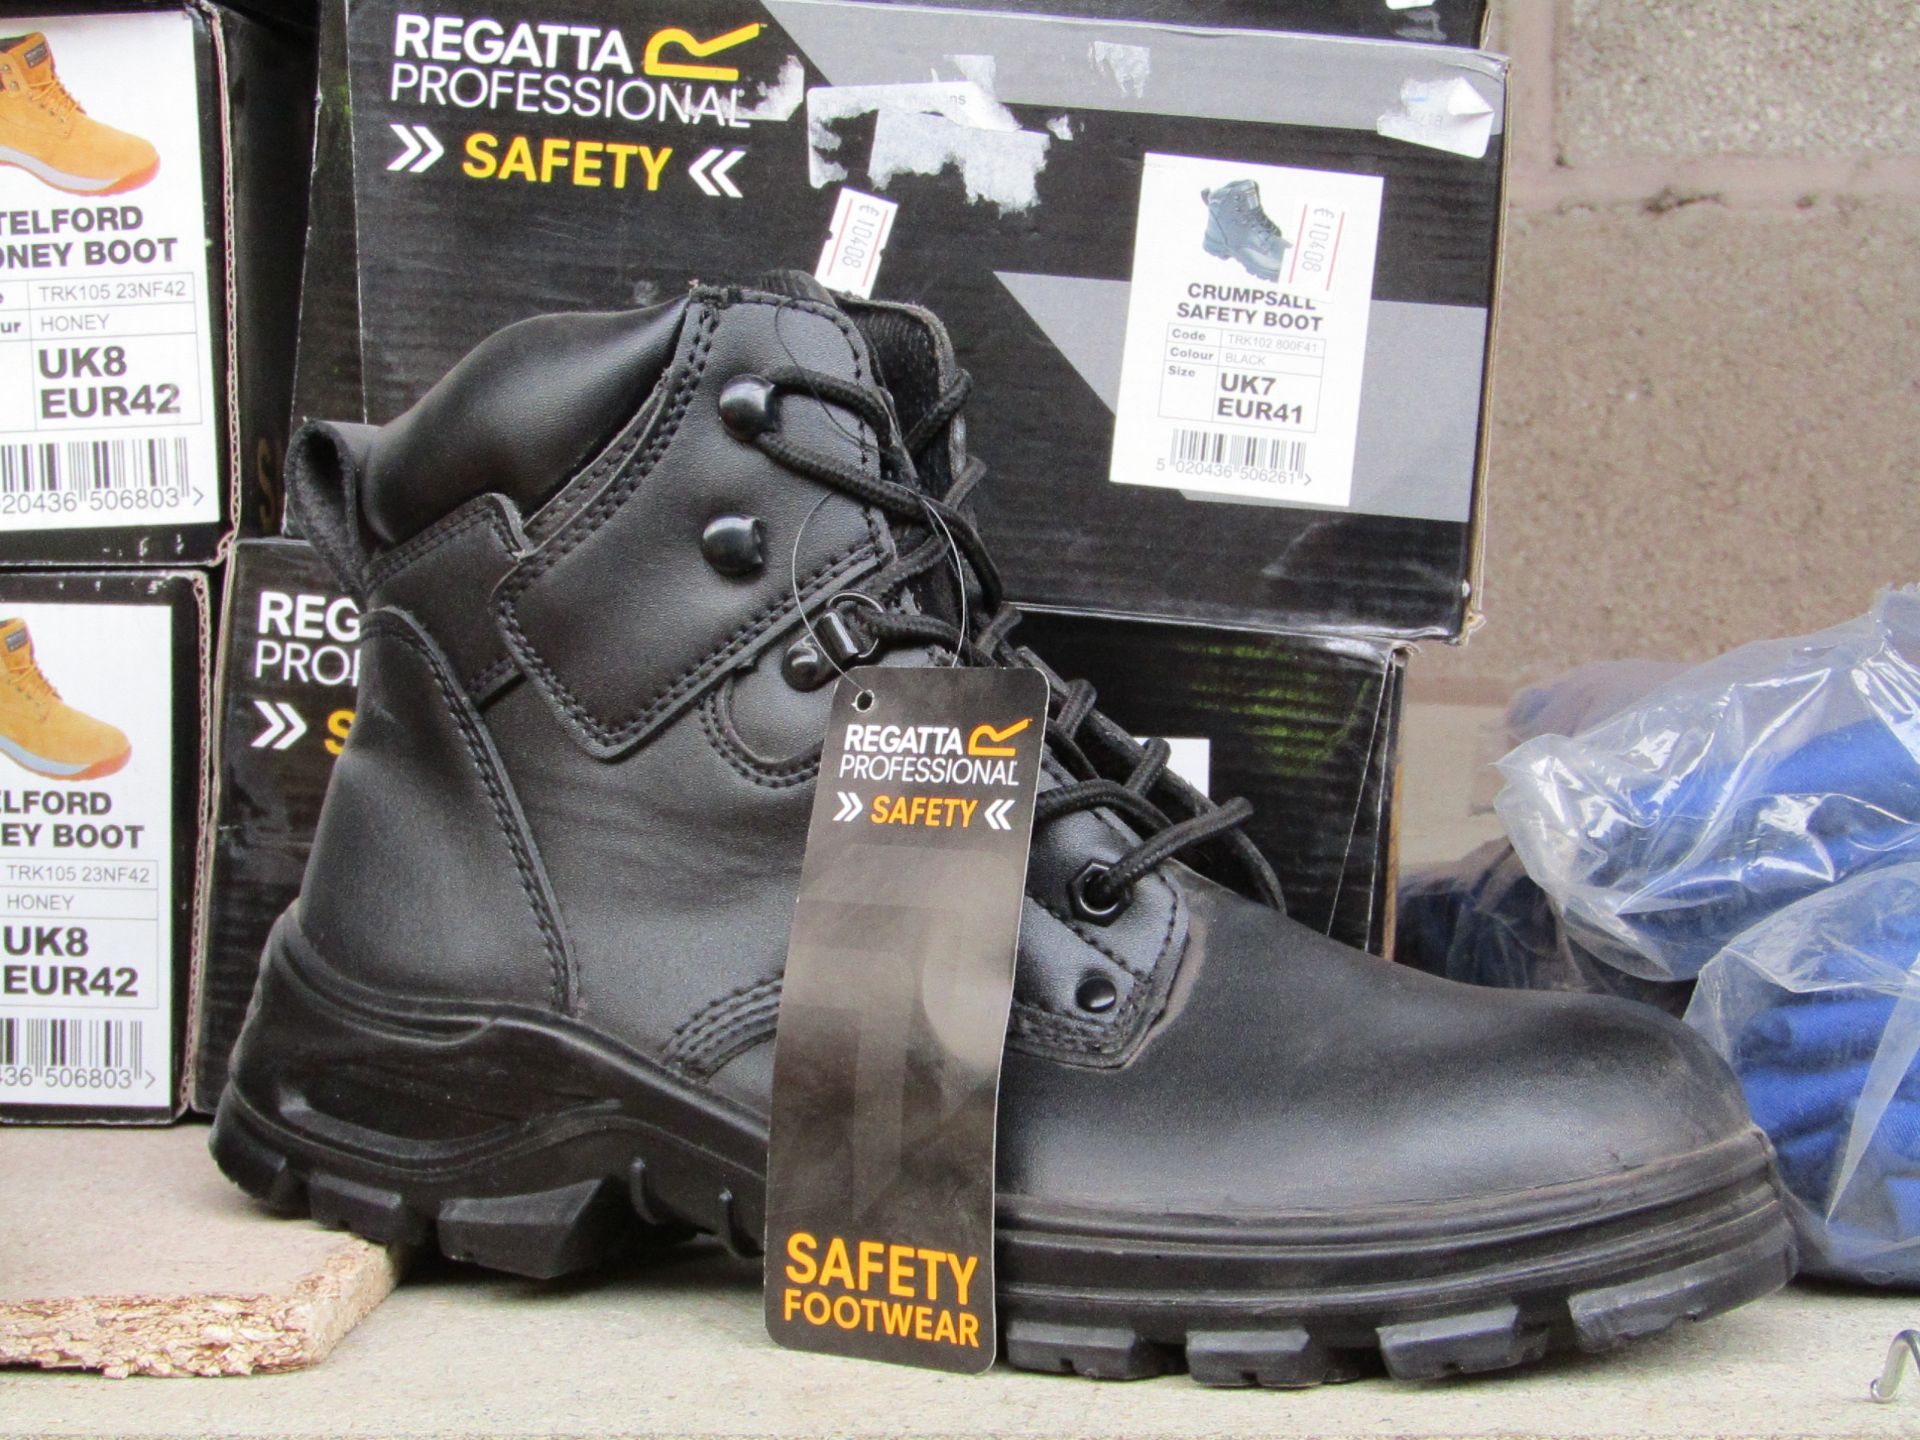 Regatta Professional Crumpsall Safety Boot. Size 8, EUR 42. New and boxed